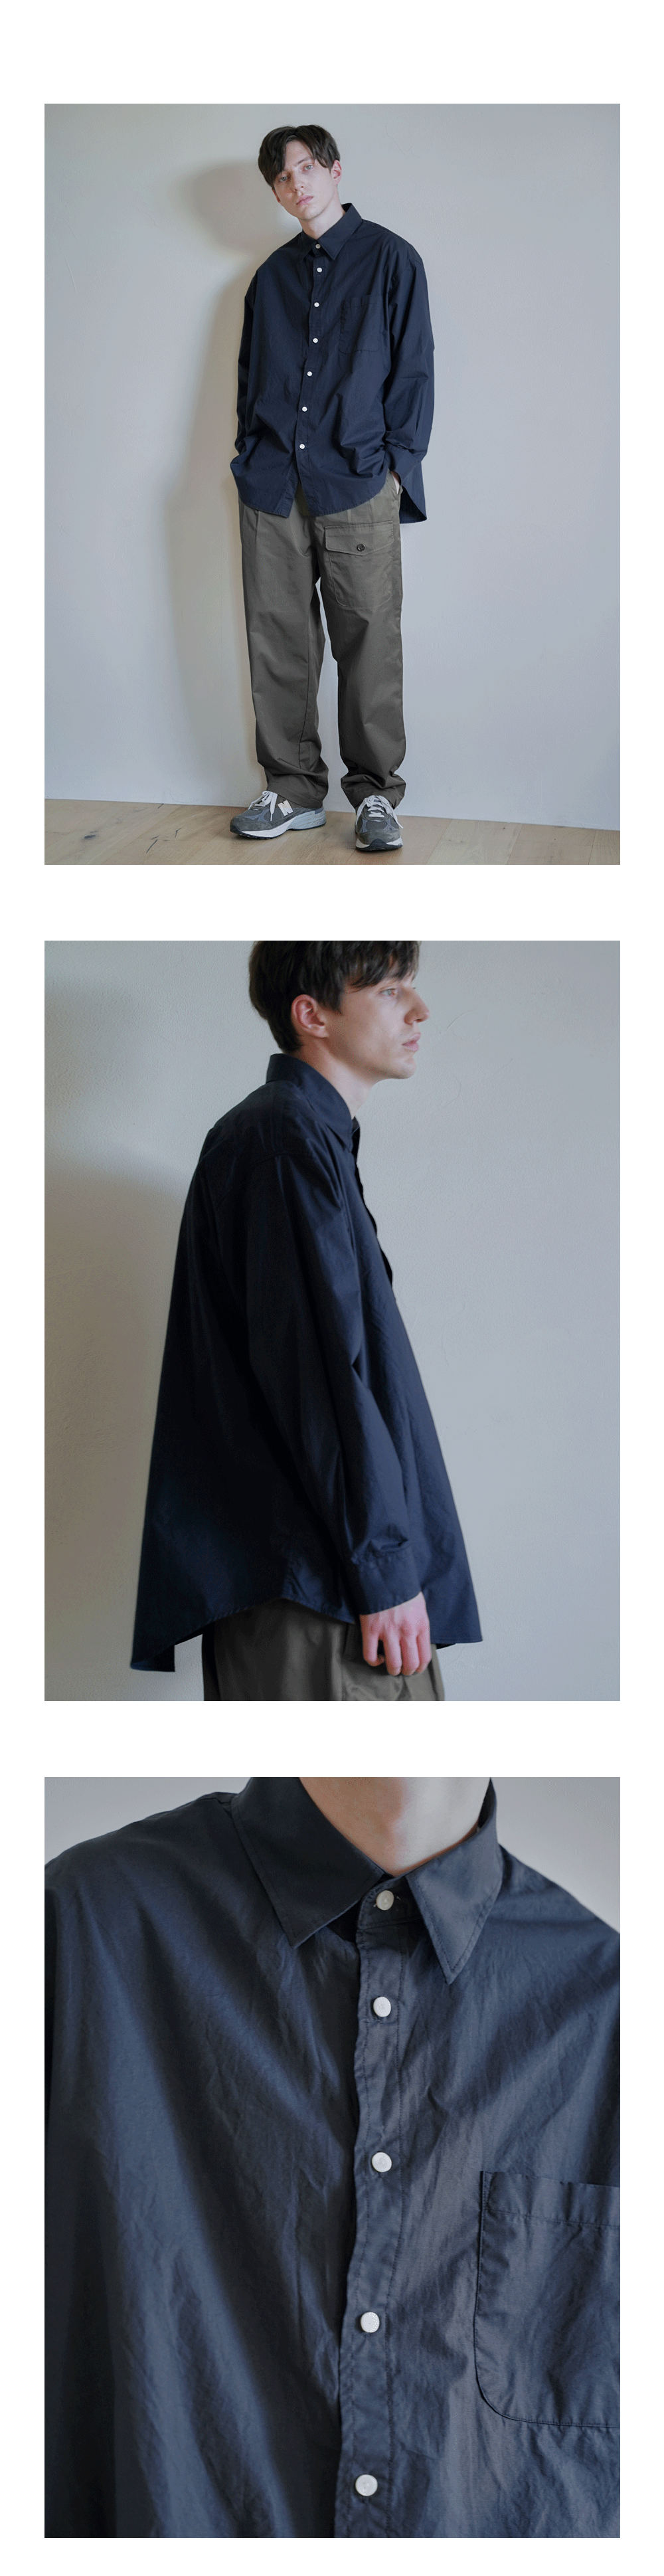 ALL-WEATHER-OVER-SILHOUETTE-SHIRTS-(navy)_03.gif